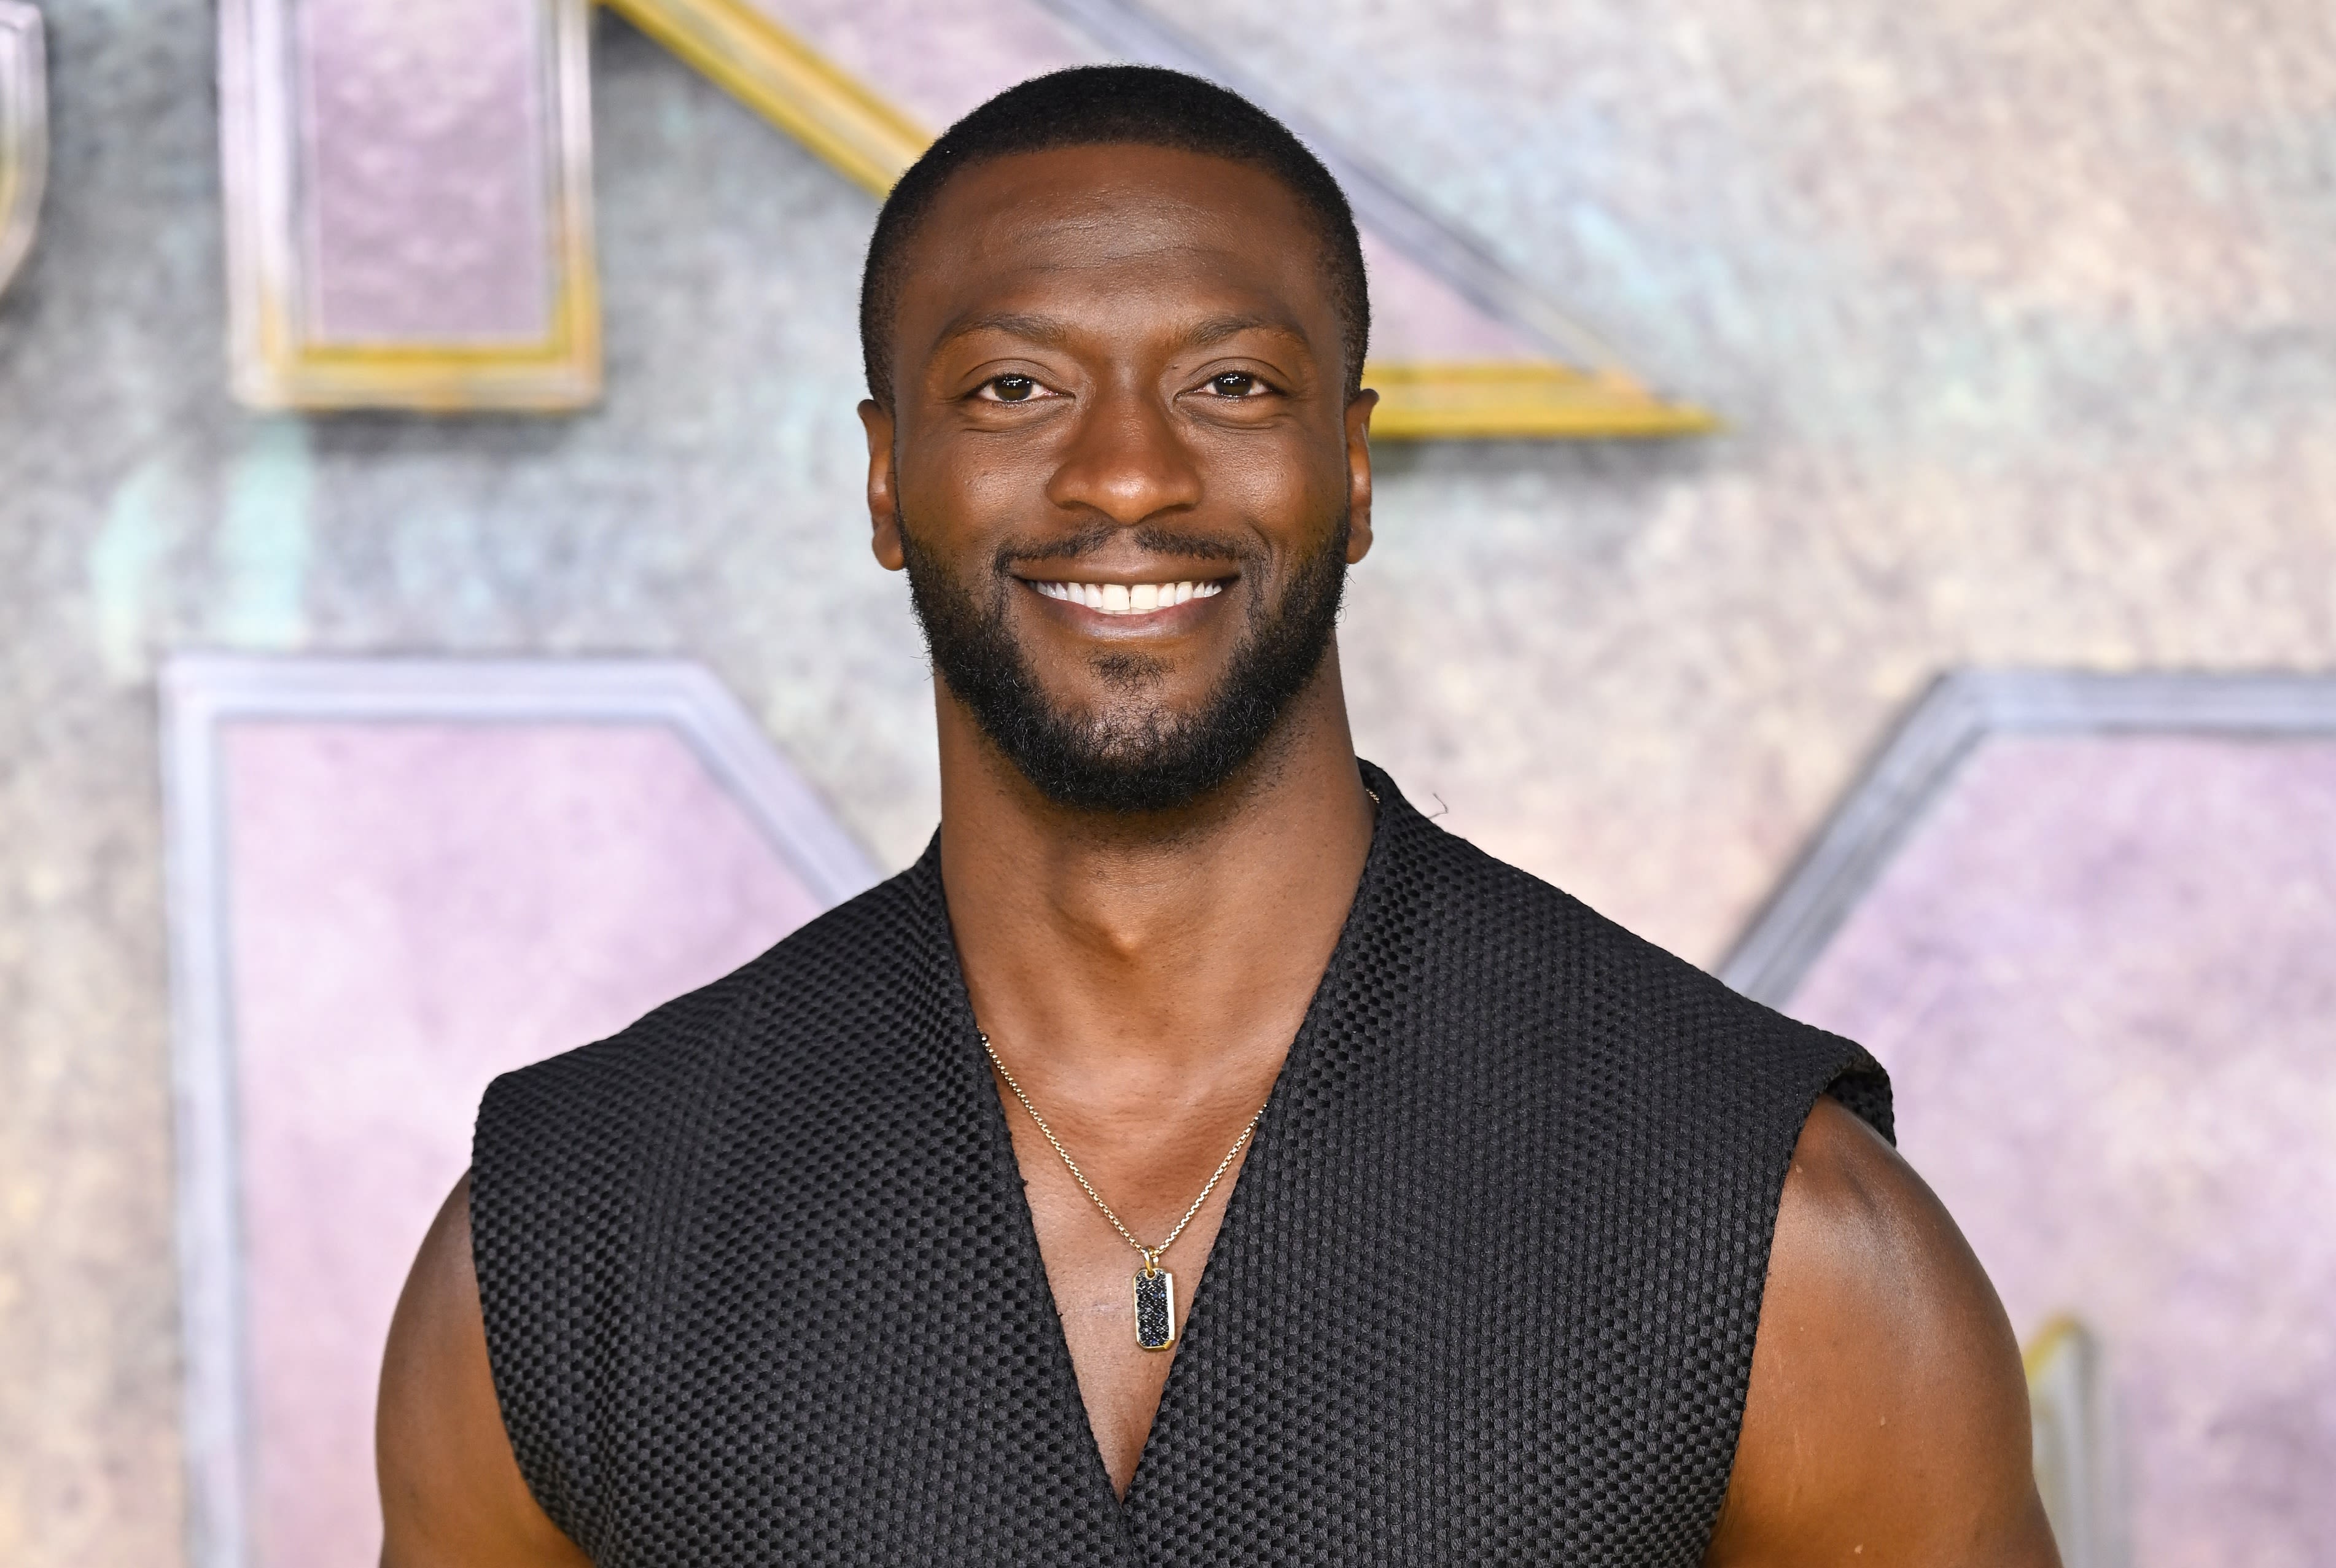 Panty-Sizzler Aldis Hodge Stars As Detective Alex Cross In Teaser Trailer For ‘Pulse-Pounding’ Prime Video Series